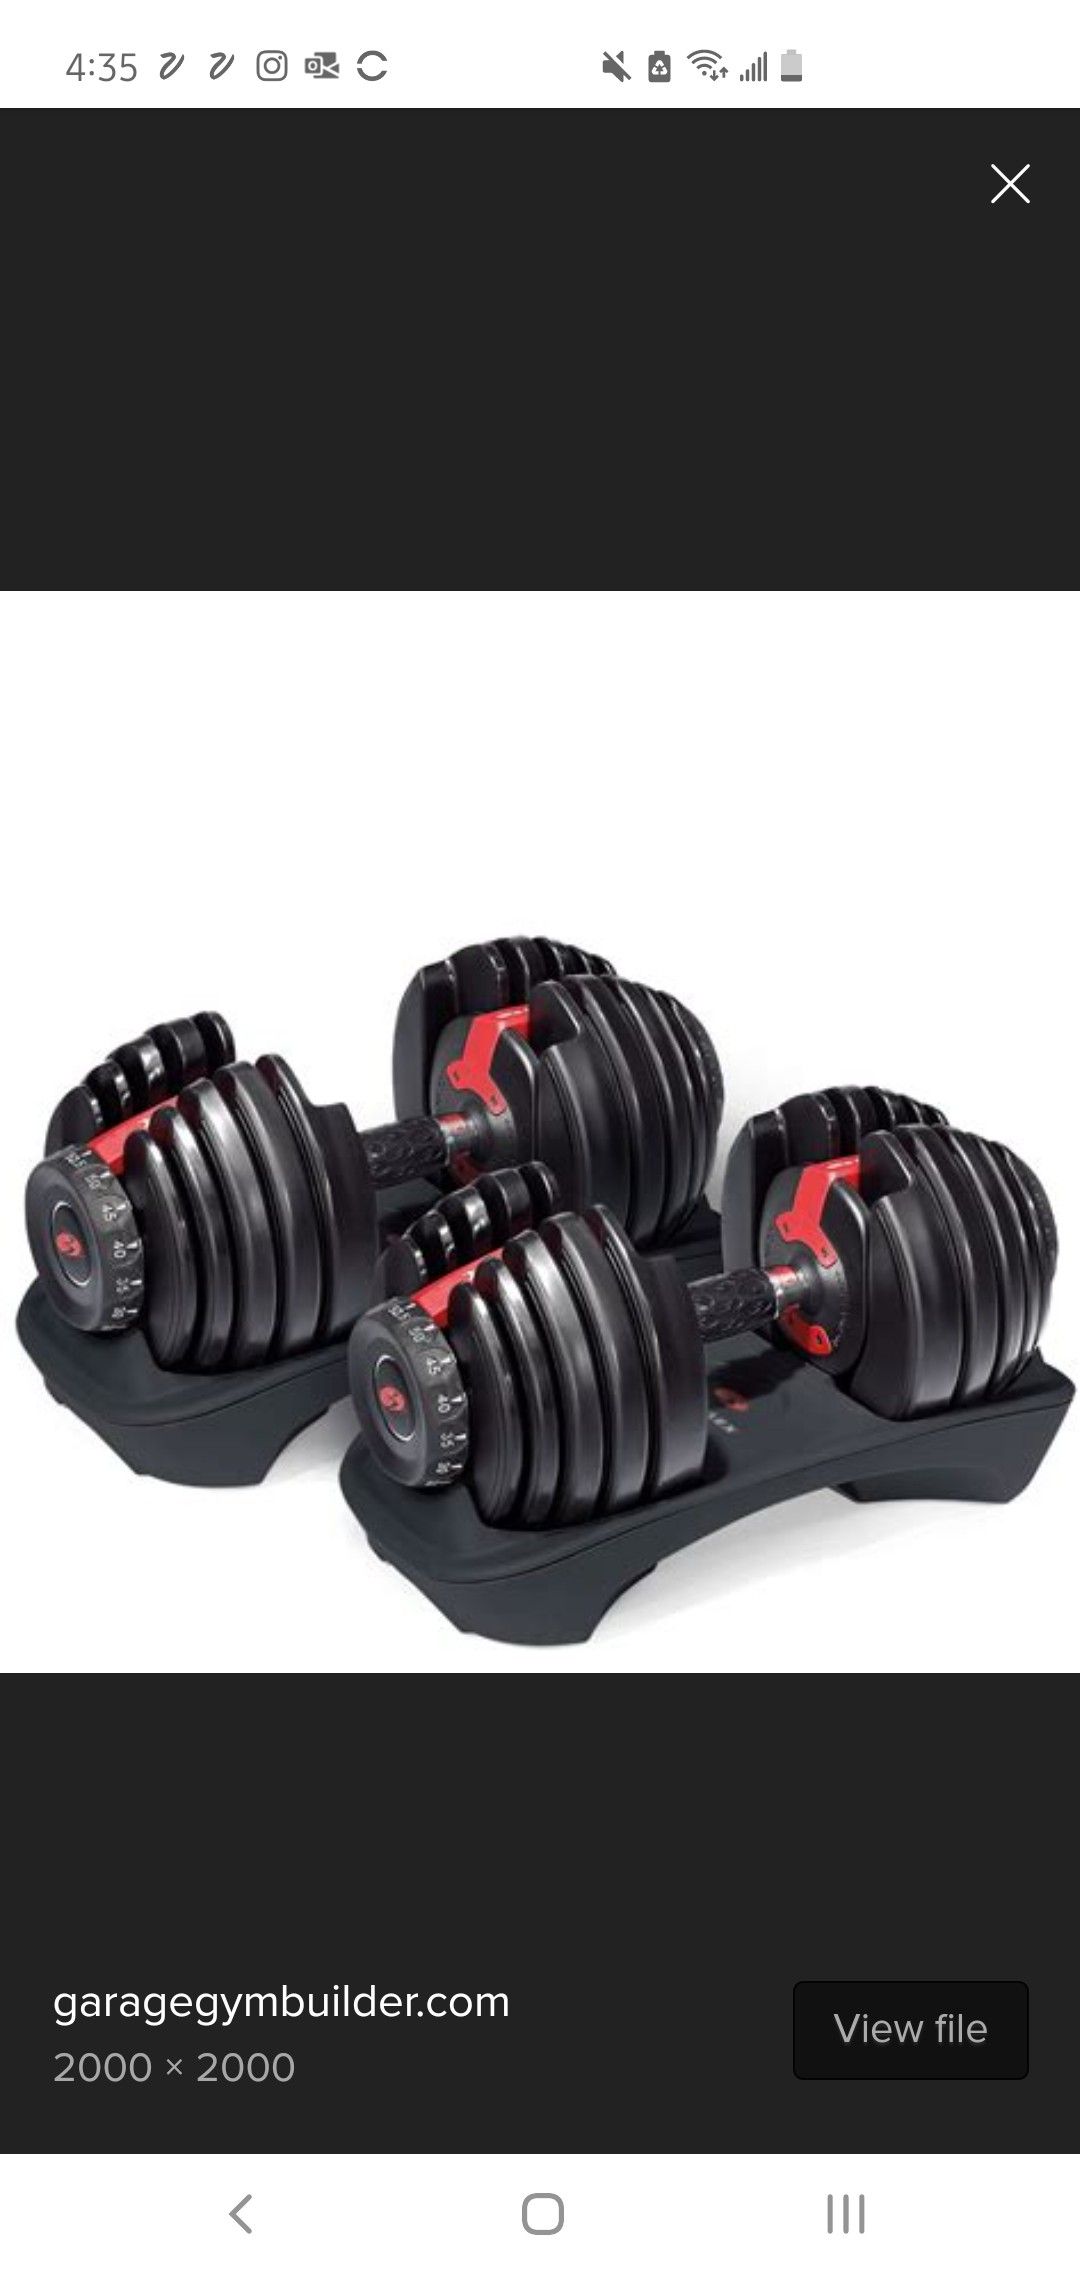 Adjustable dumbells - New in box, never opened - Bowflex